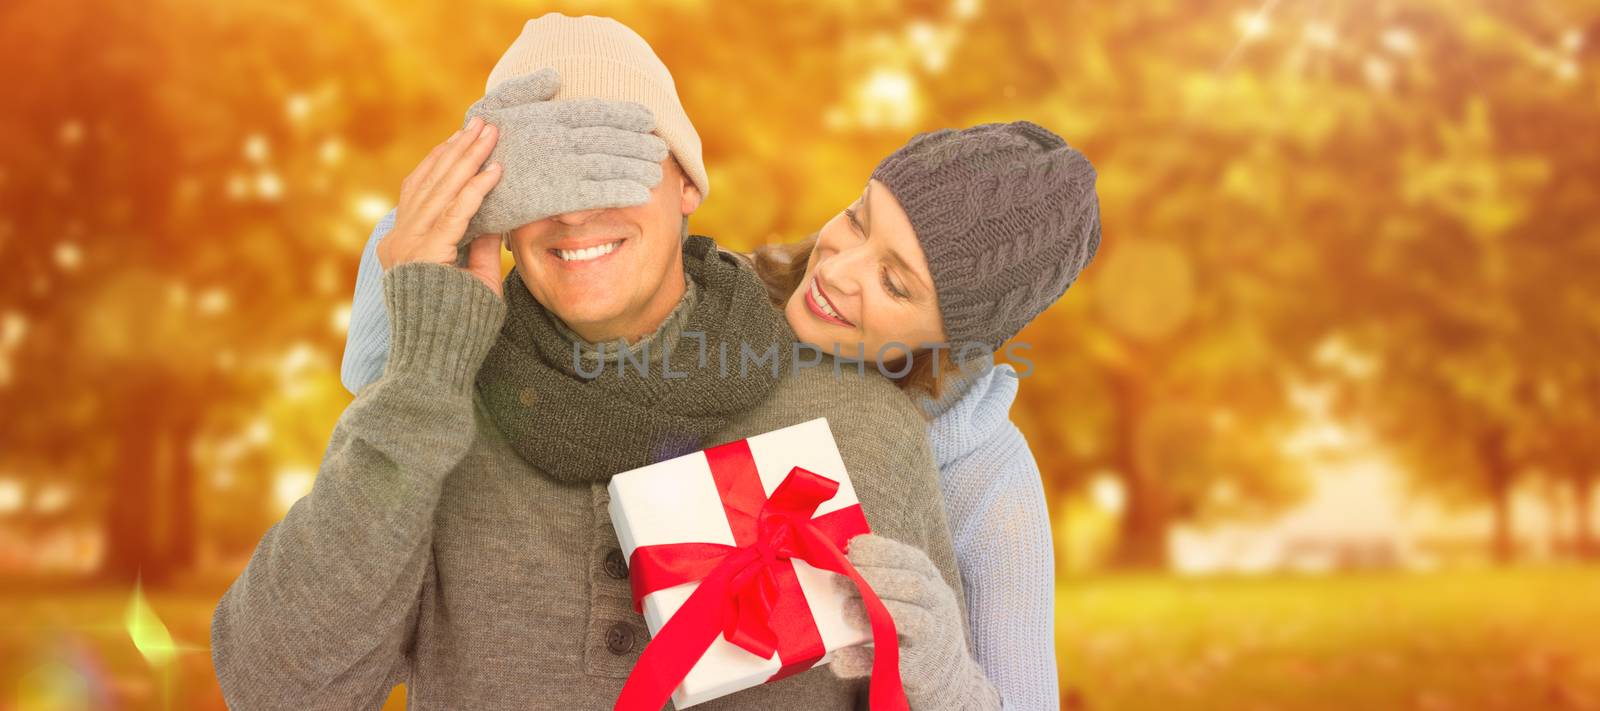 Woman surprising husband with gift against autumn scene